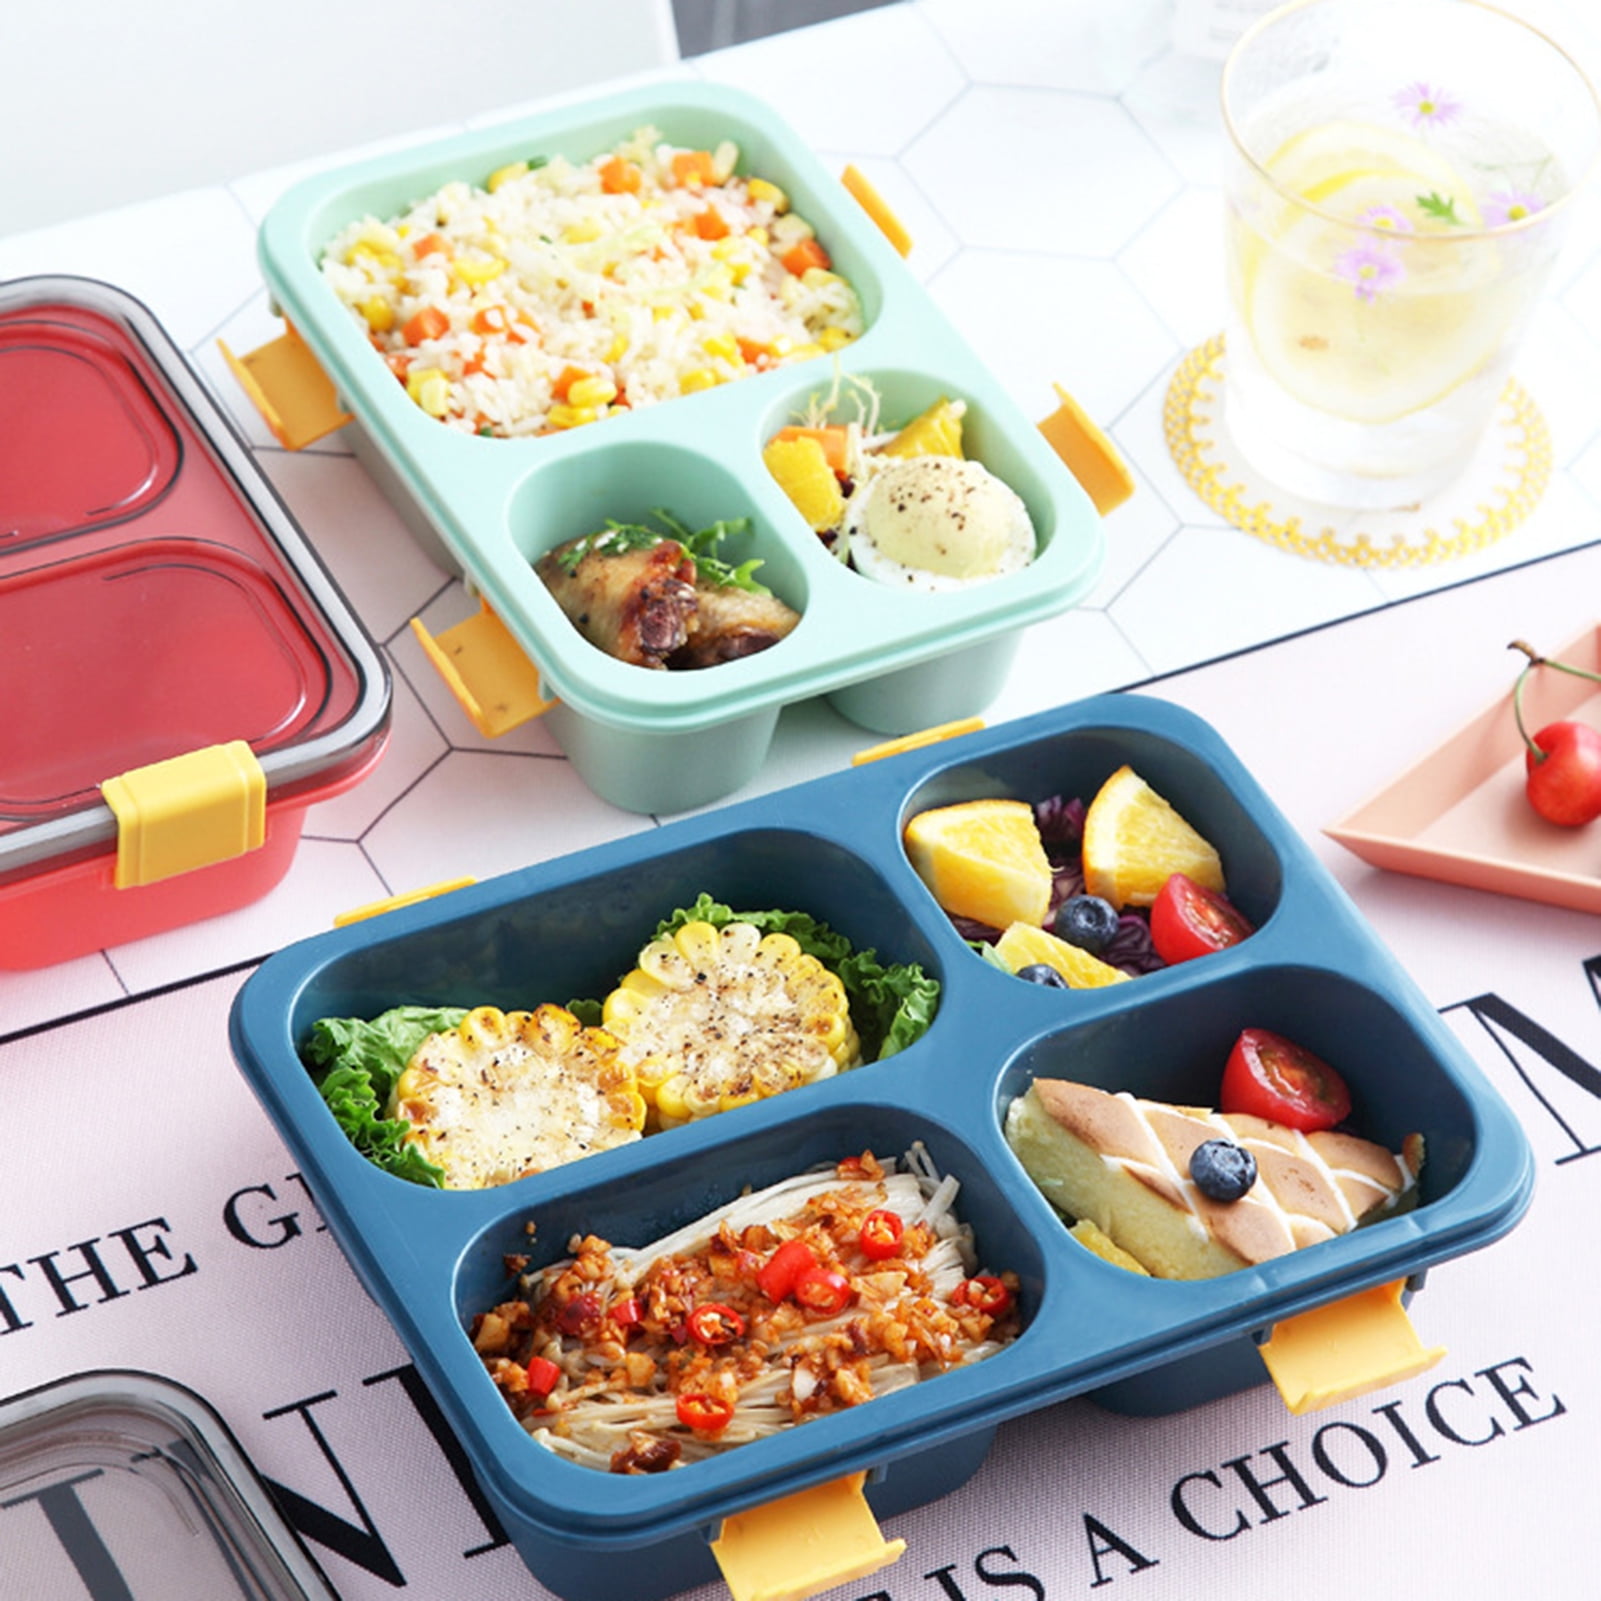 Bento Box Adult Lunch Box Lunch Containers For Adults Men Women With 4  Compartments Food Container With Utensils Sauce Jar - AliExpress